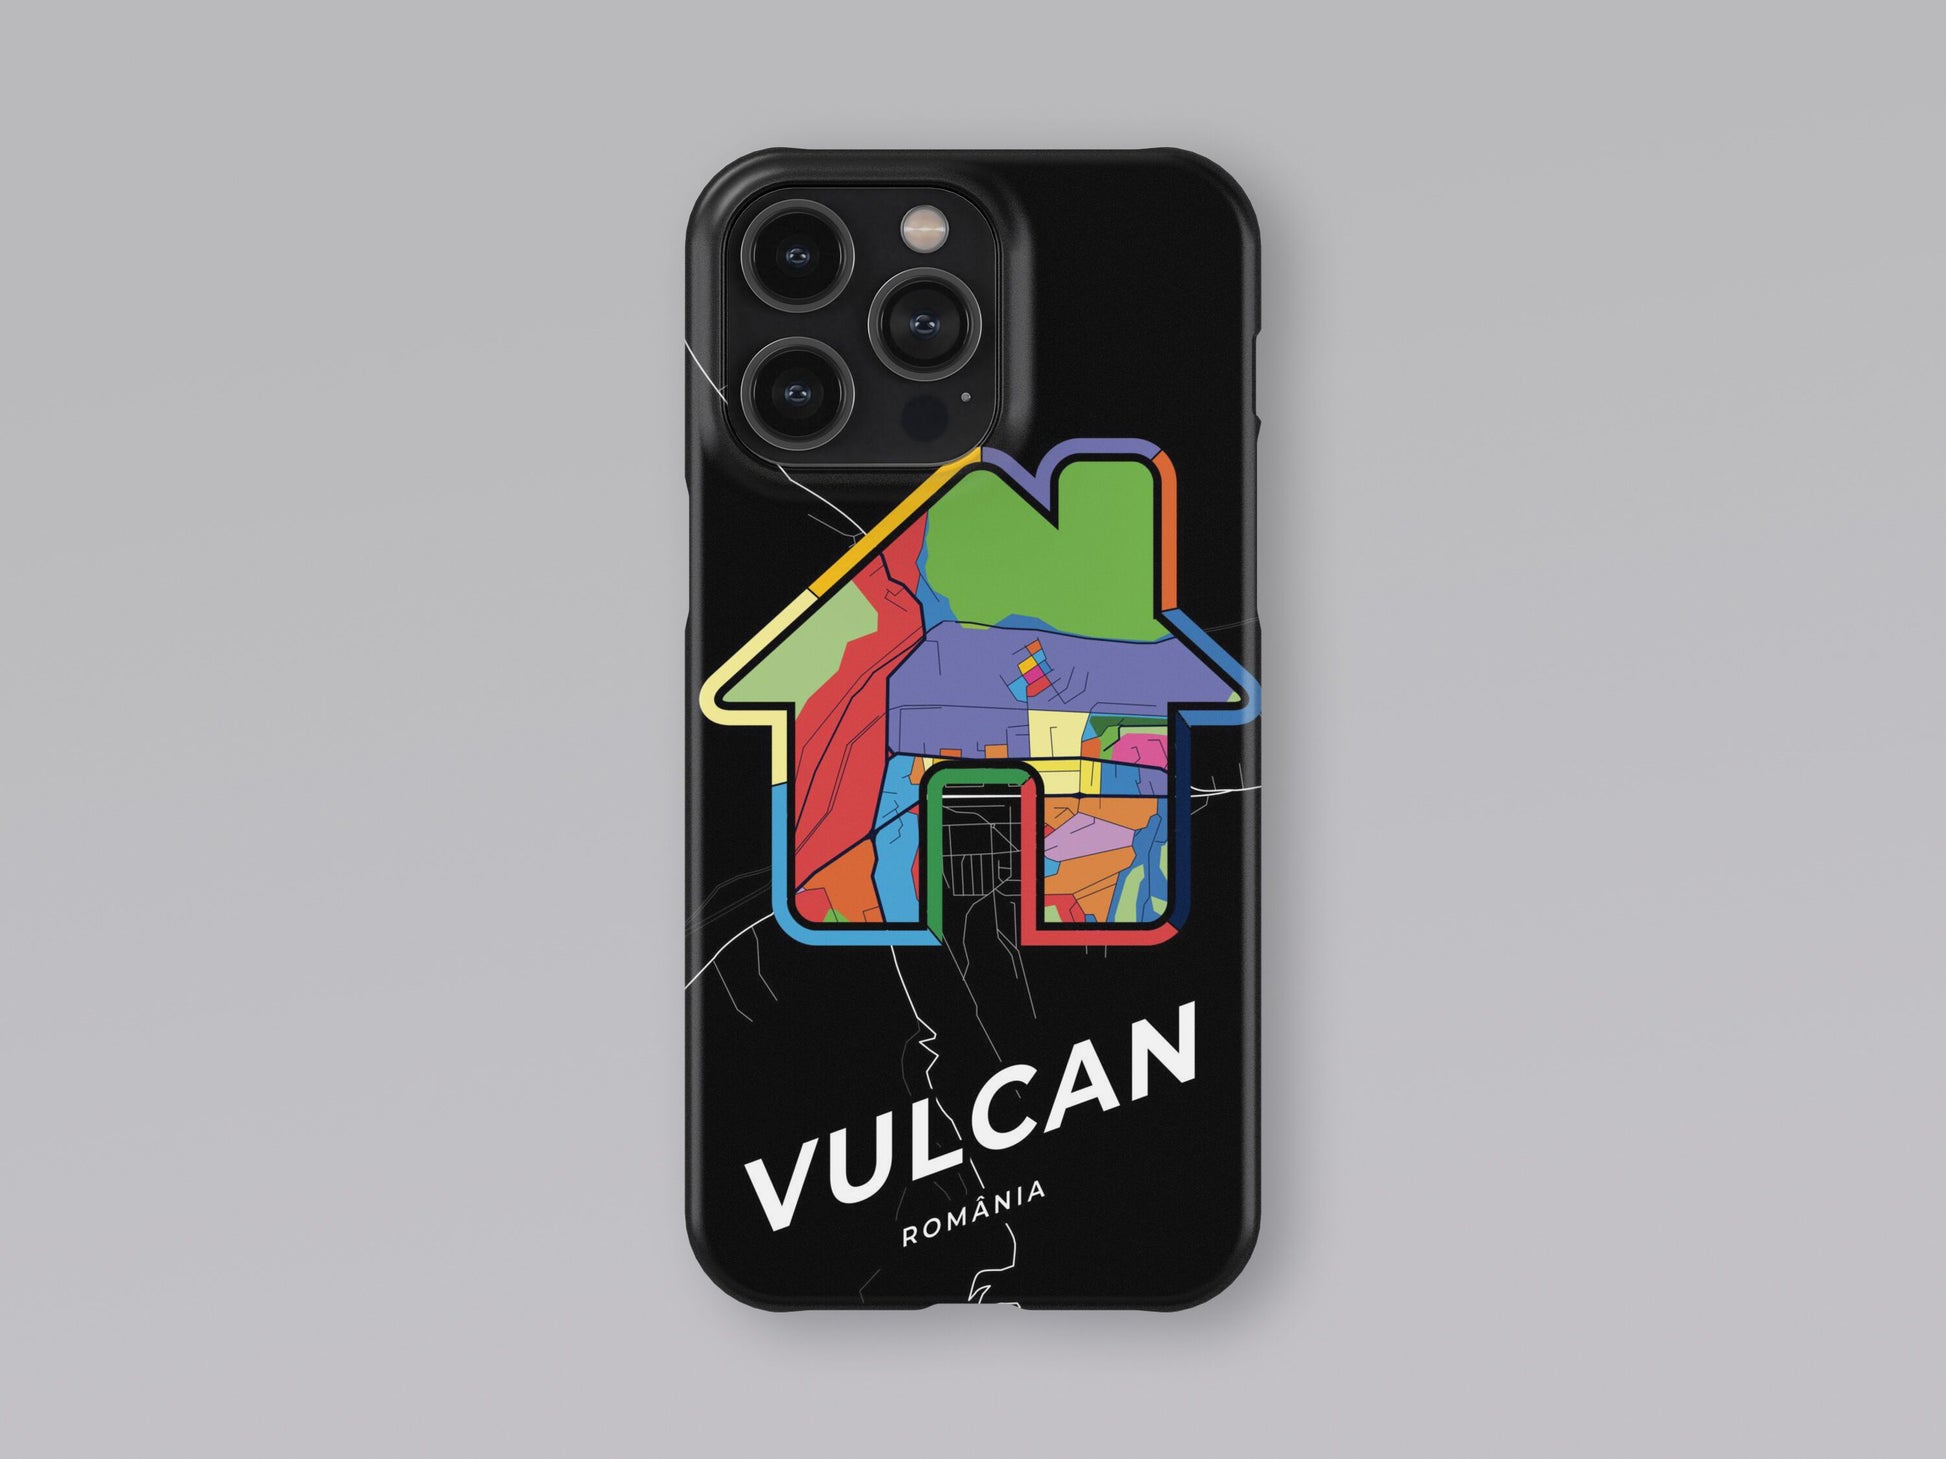 Vulcan Romania slim phone case with colorful icon 3